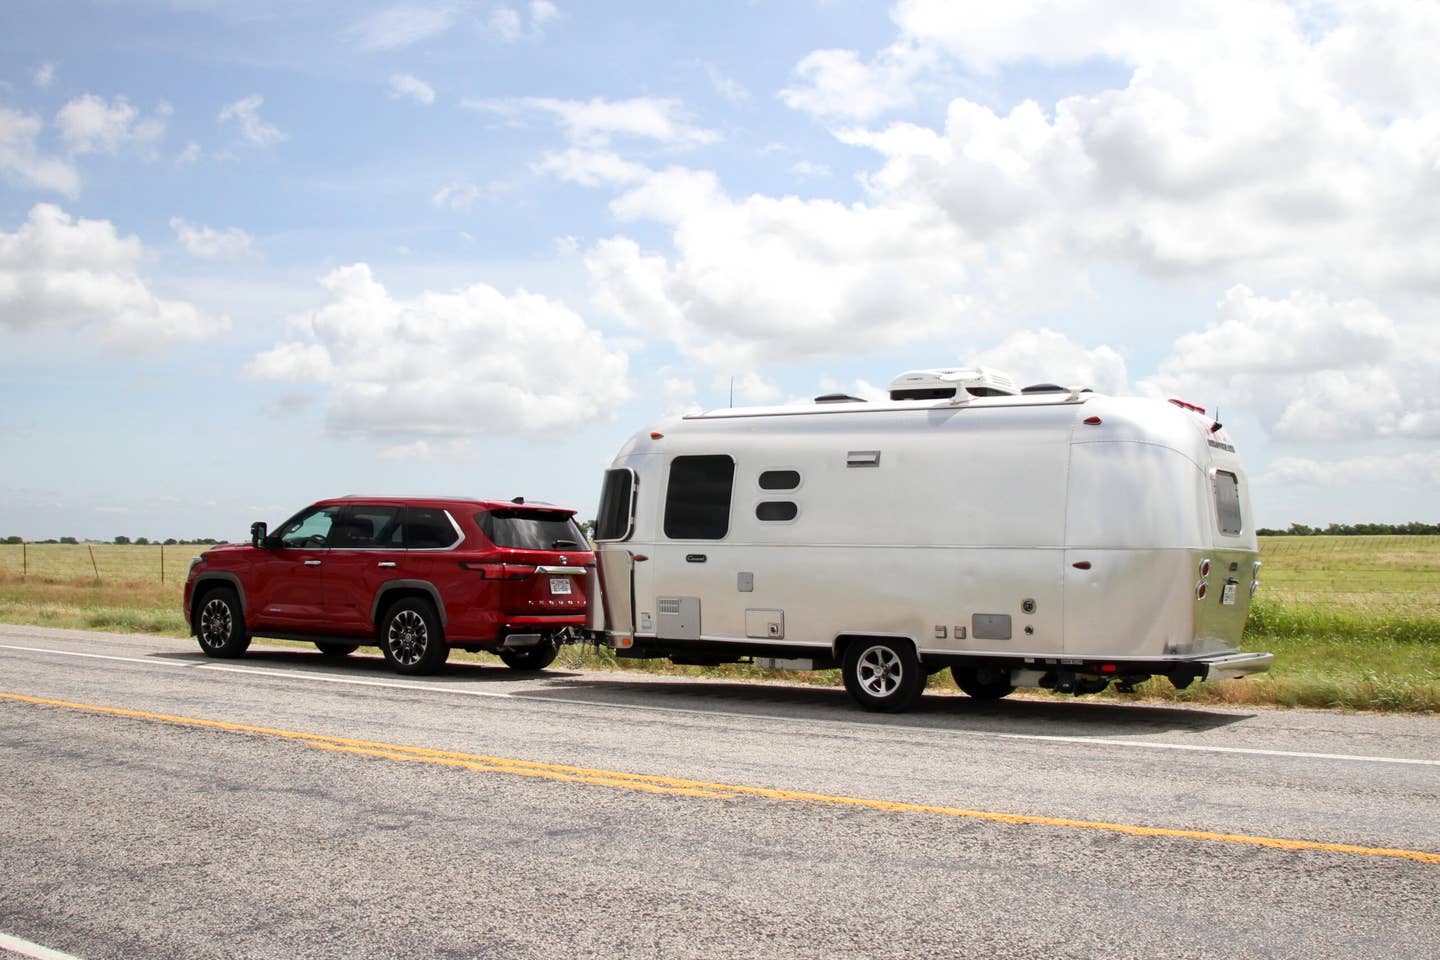 Toyota Sequoia towing a trailer.